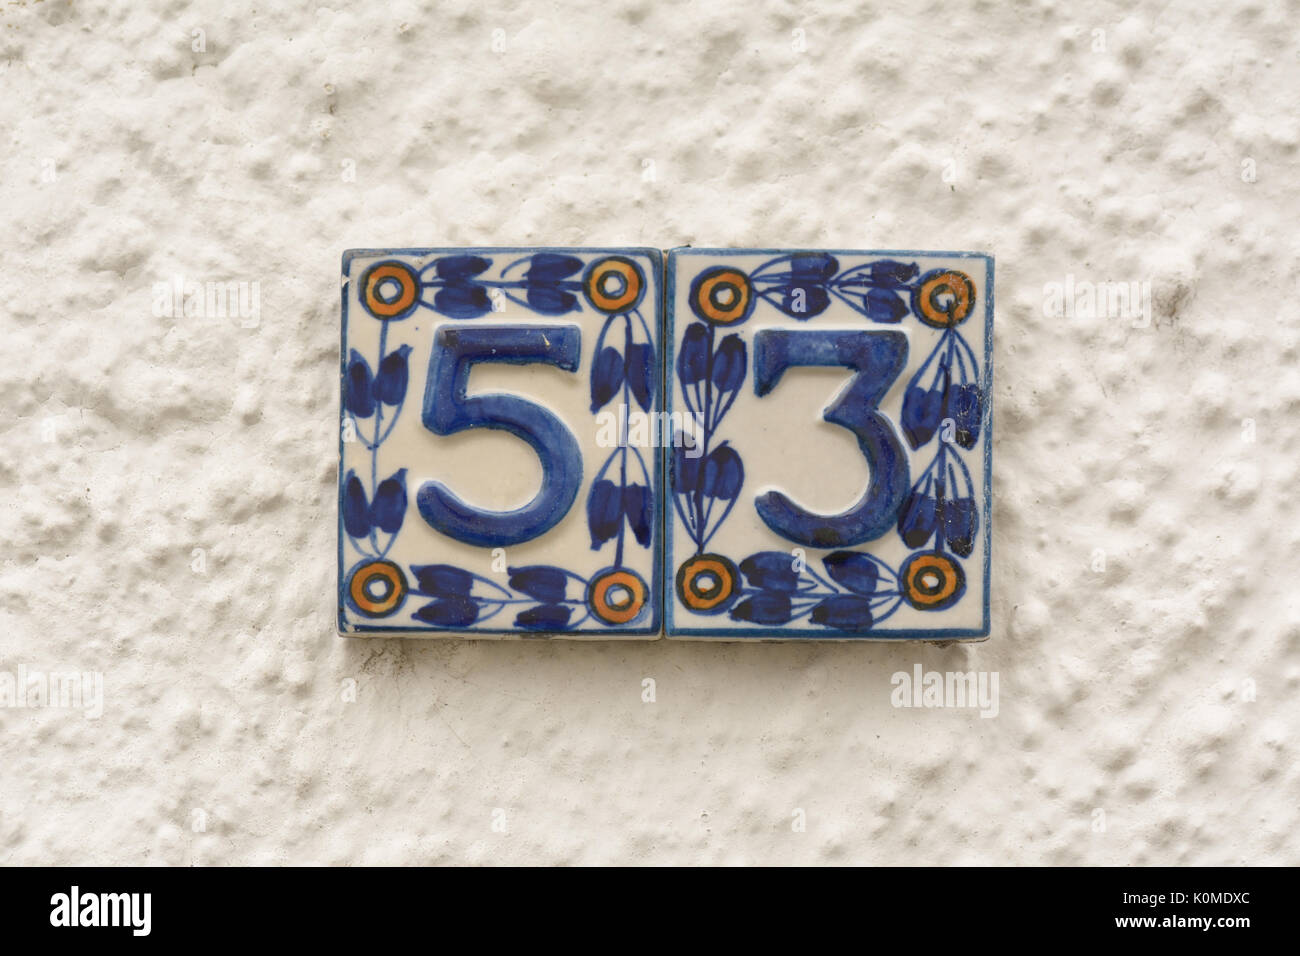 House number 53 ceramic sign on wall Stock Photo